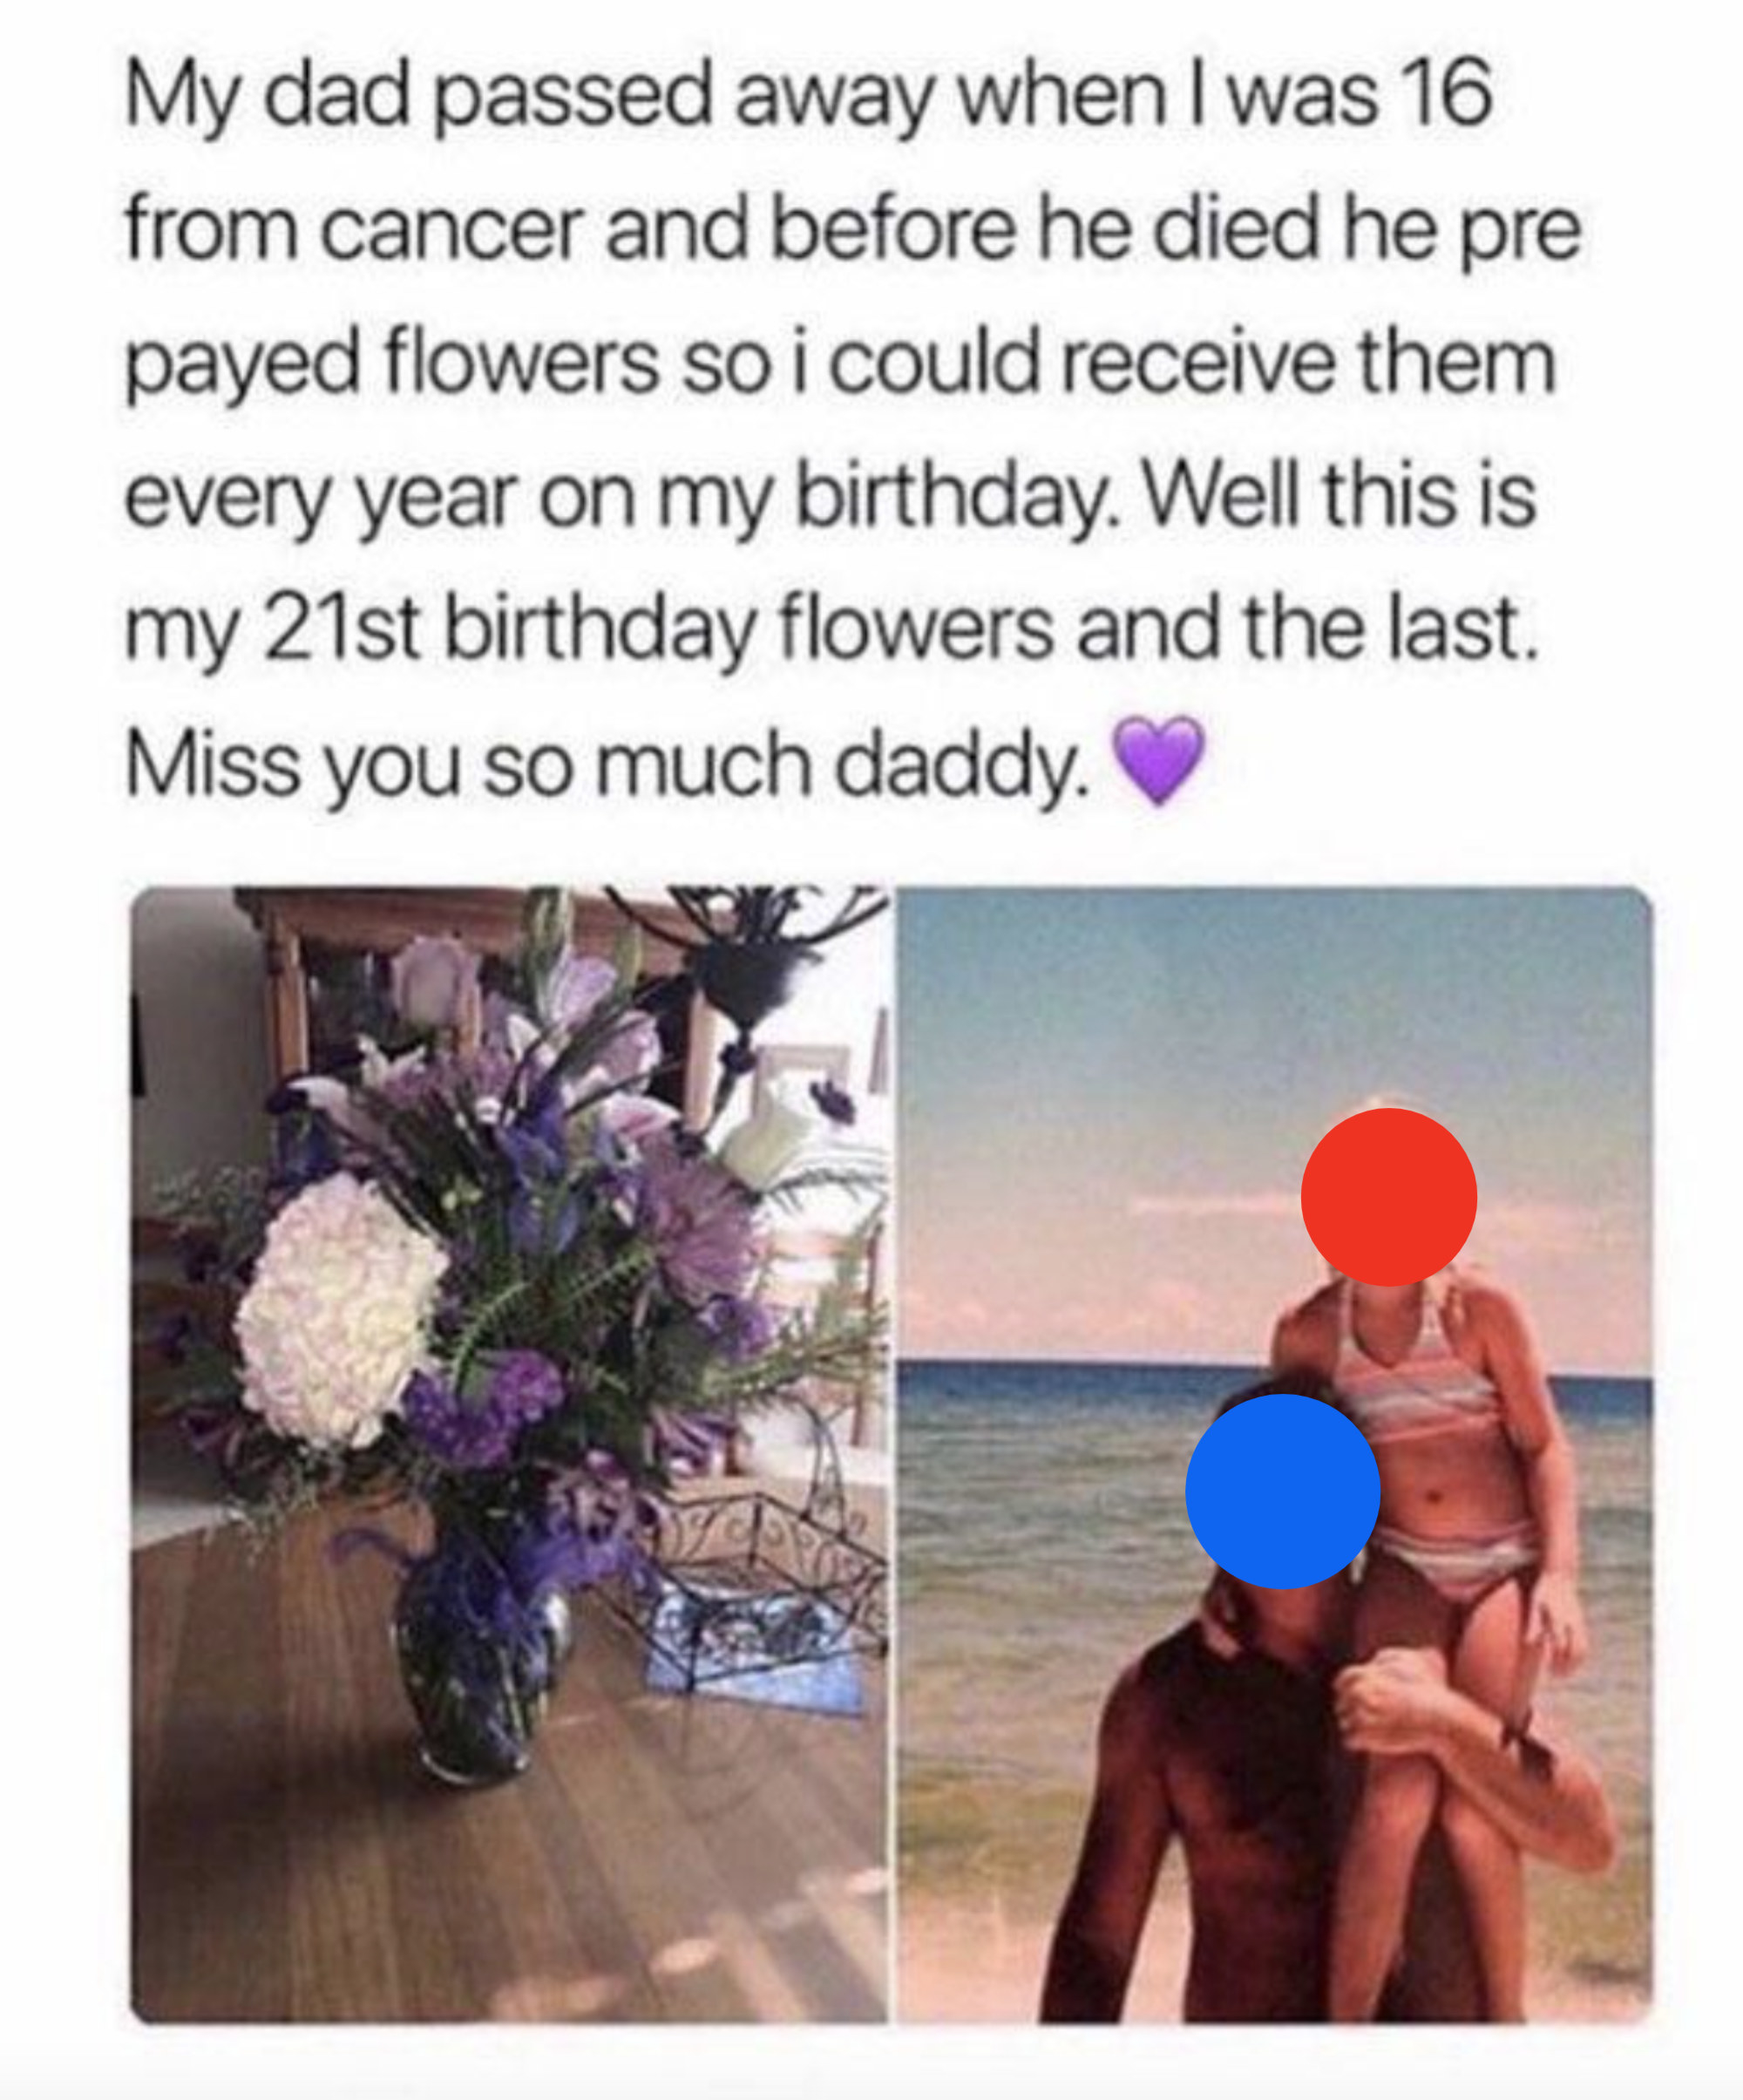 Dad who died of cancer sent daughter flowers every year for her birthday after he passed